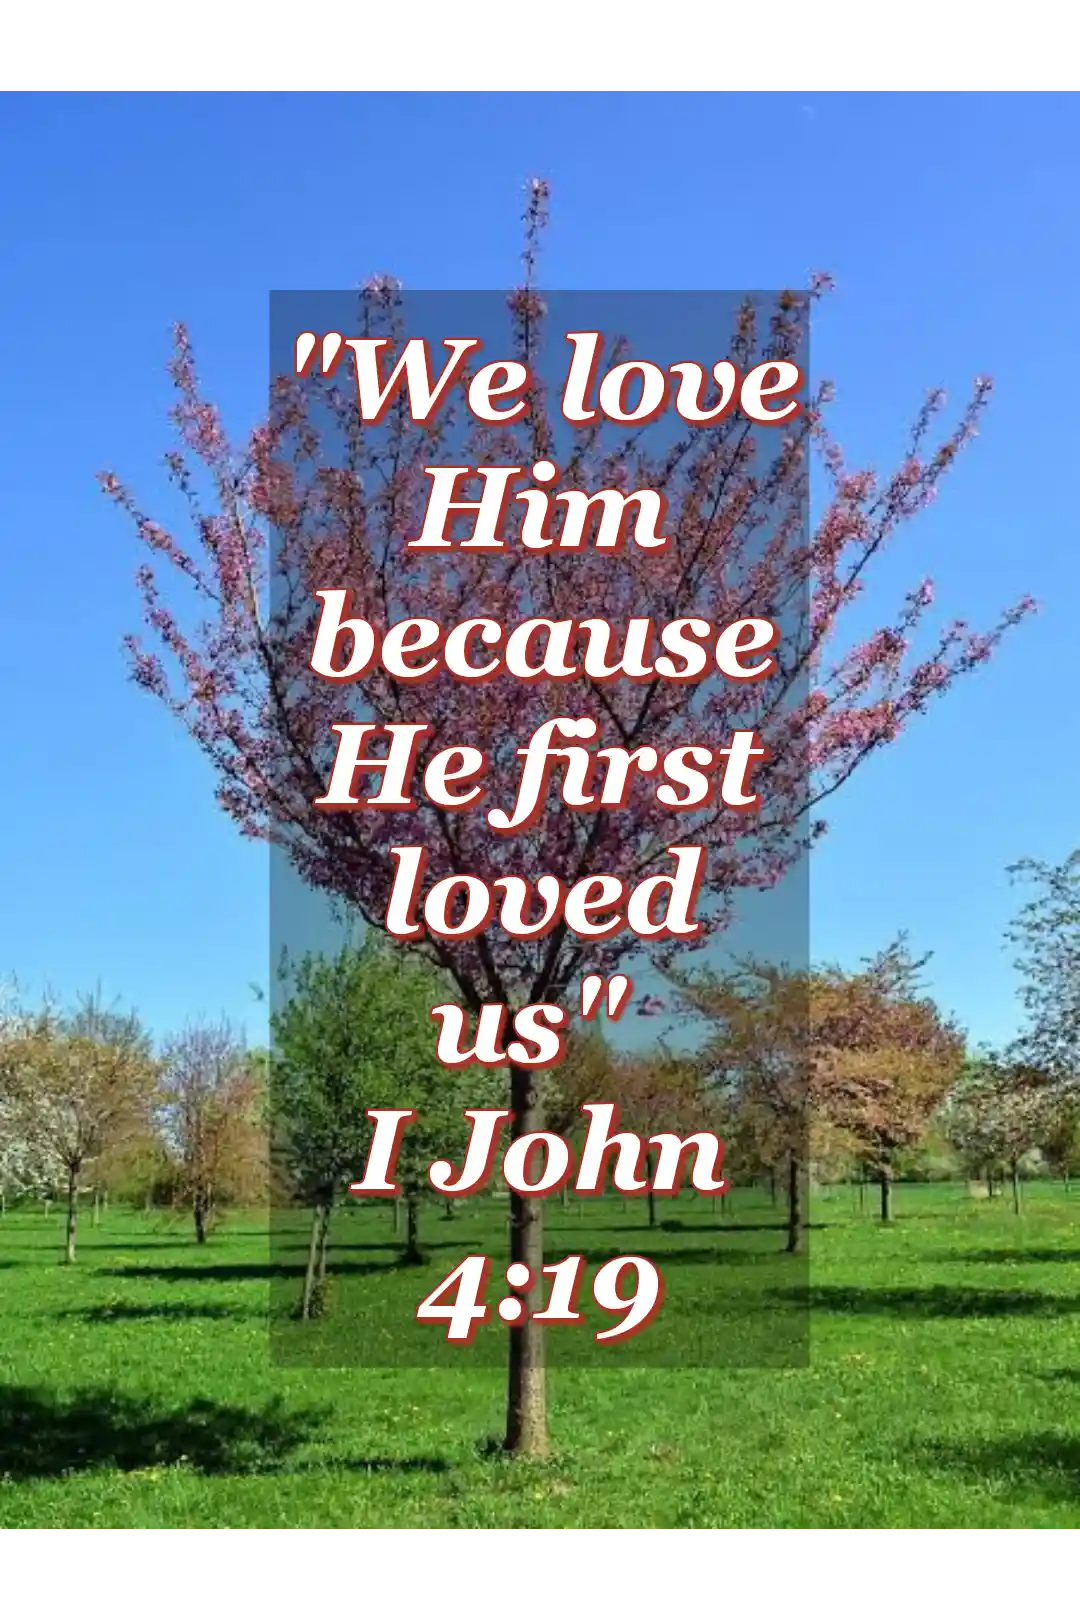 Bible verses about god’s love for us (1 John 4:19)